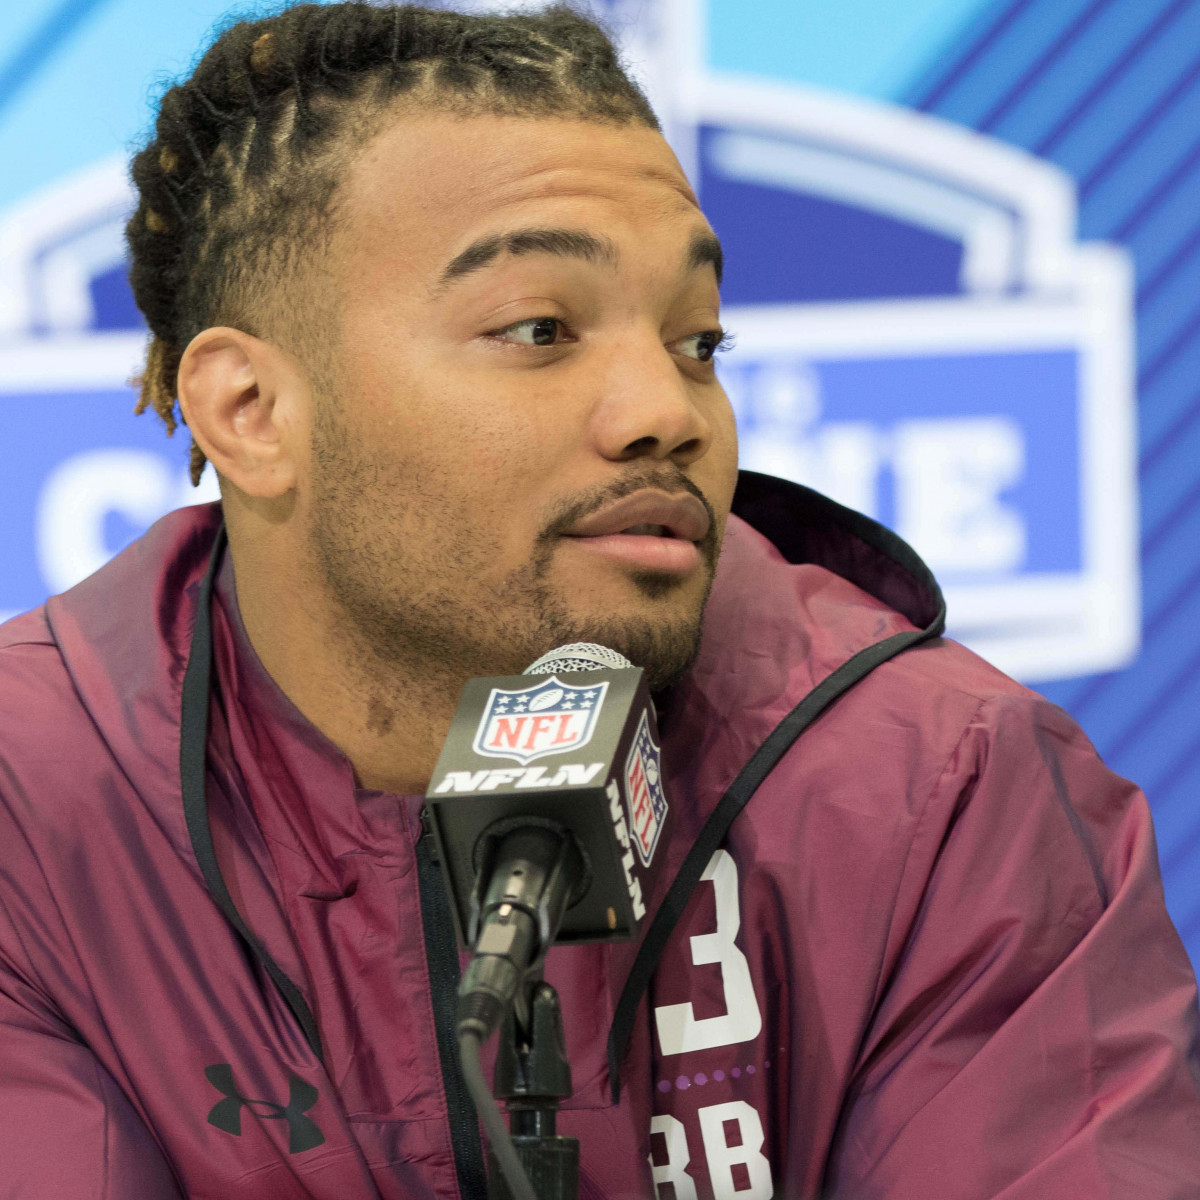 NFL Combine 2018: Live Friday Updates, Results for RB, OL and ST Workouts